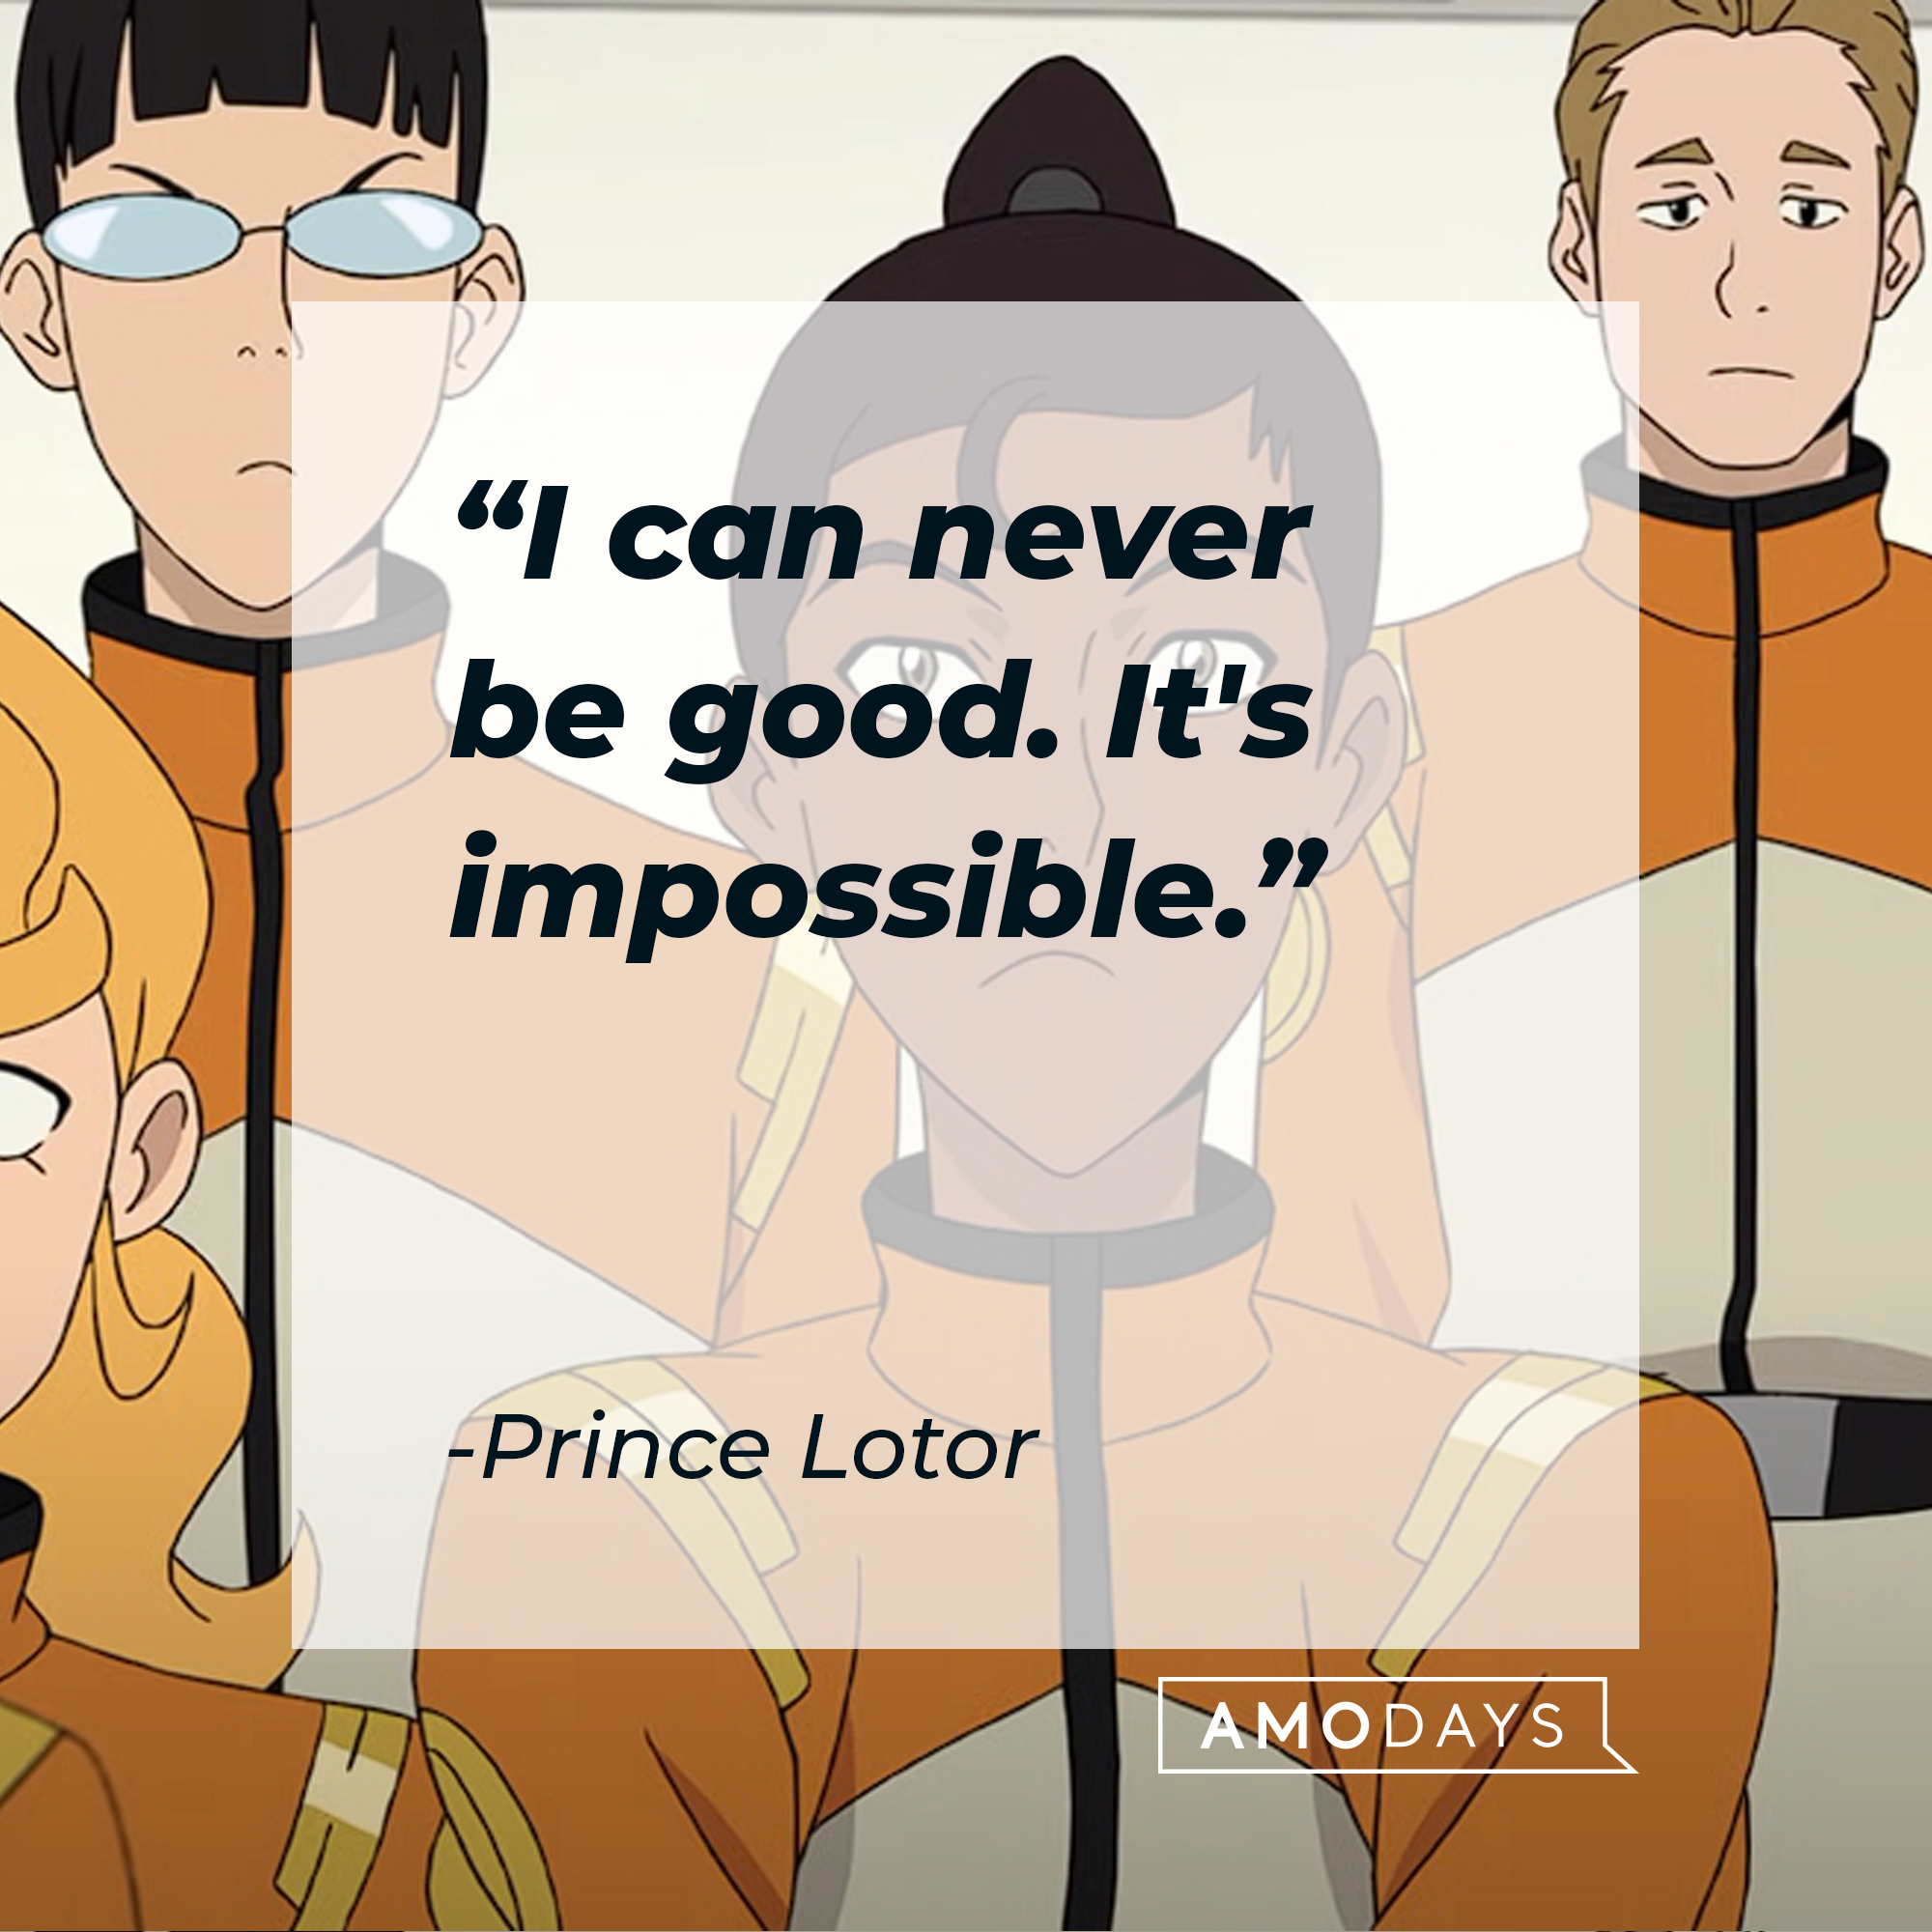 Prince Lotor's quote: "I can never be good. It's impossible." | Source: youtube.com/netflixafterschool